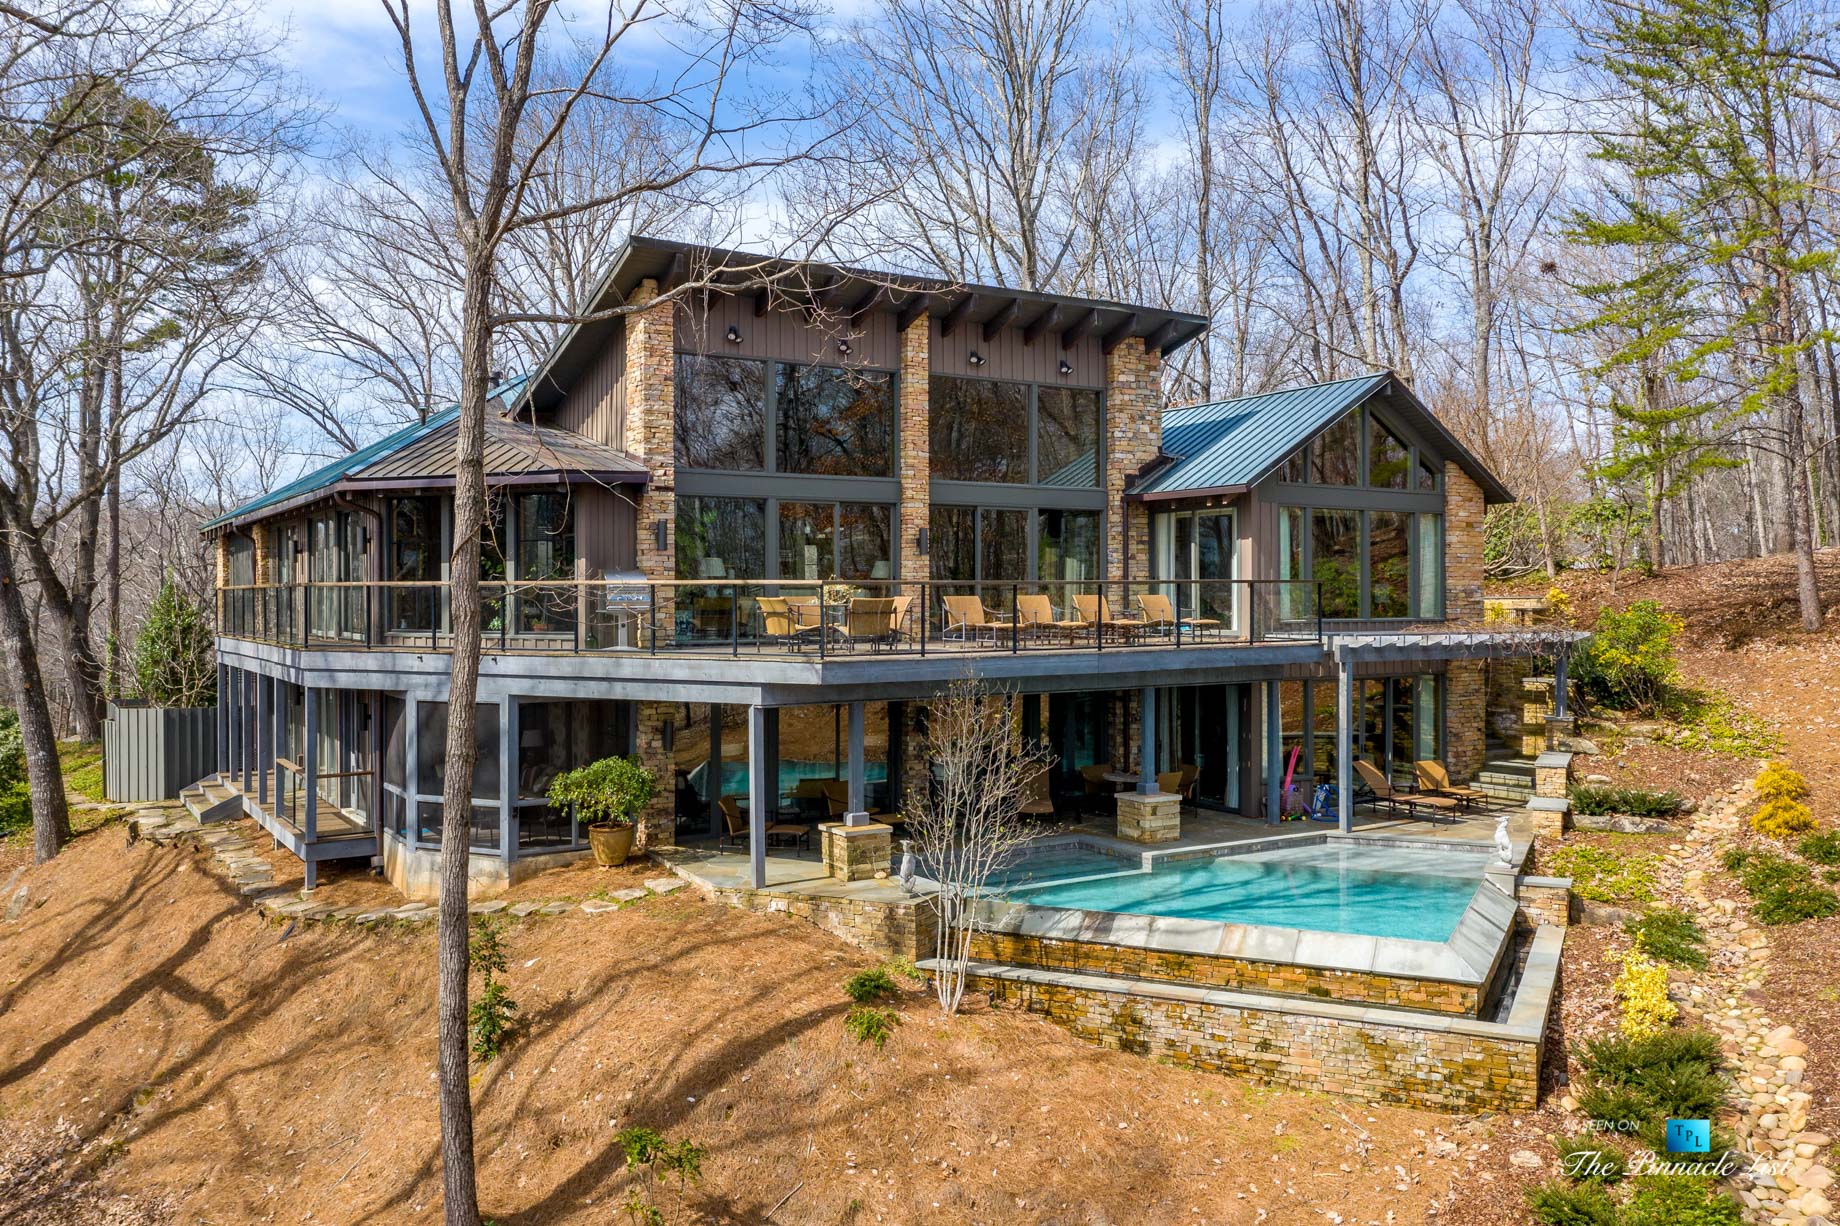 7860 Chestnut Hill Rd, Cumming, GA, USA - Exterior Deck and Pool - Luxury Real Estate - Lake Lanier Mid-Century Modern Stone Home